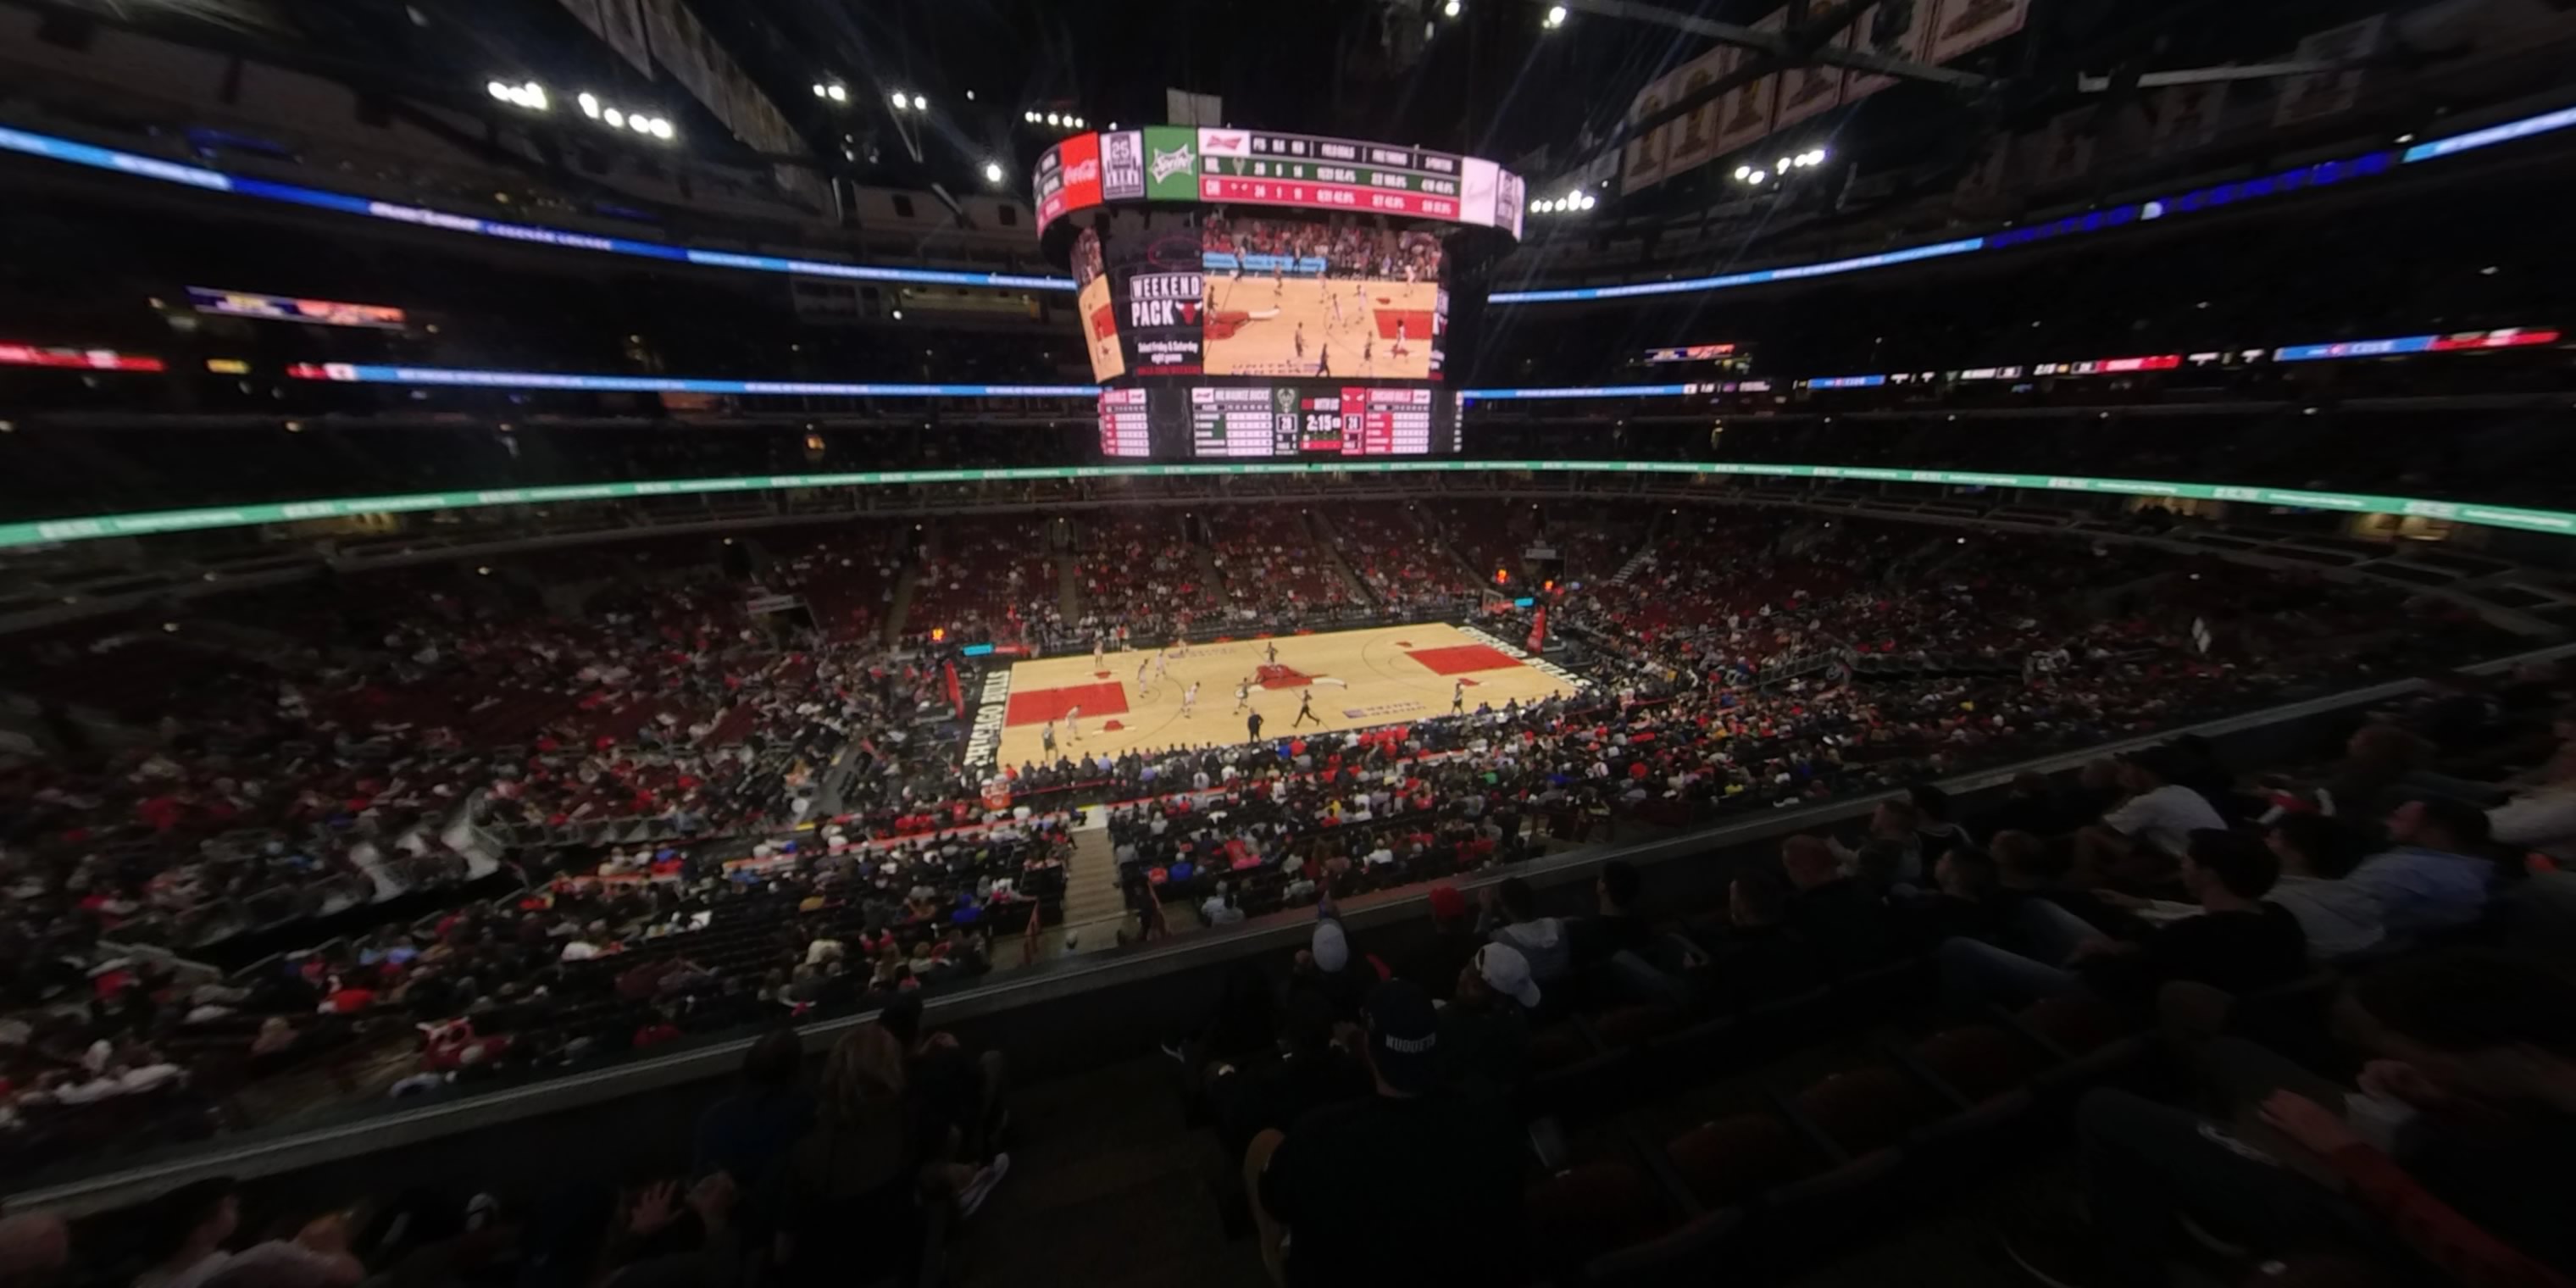 section 201 panoramic seat view  for basketball - united center